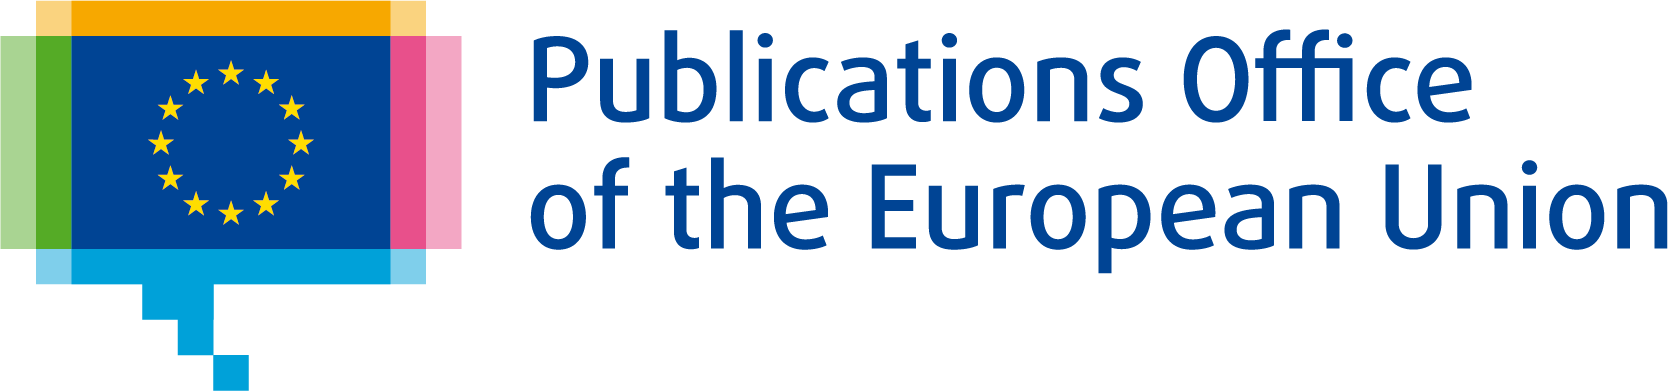 Photo of Publications Office of the European Union